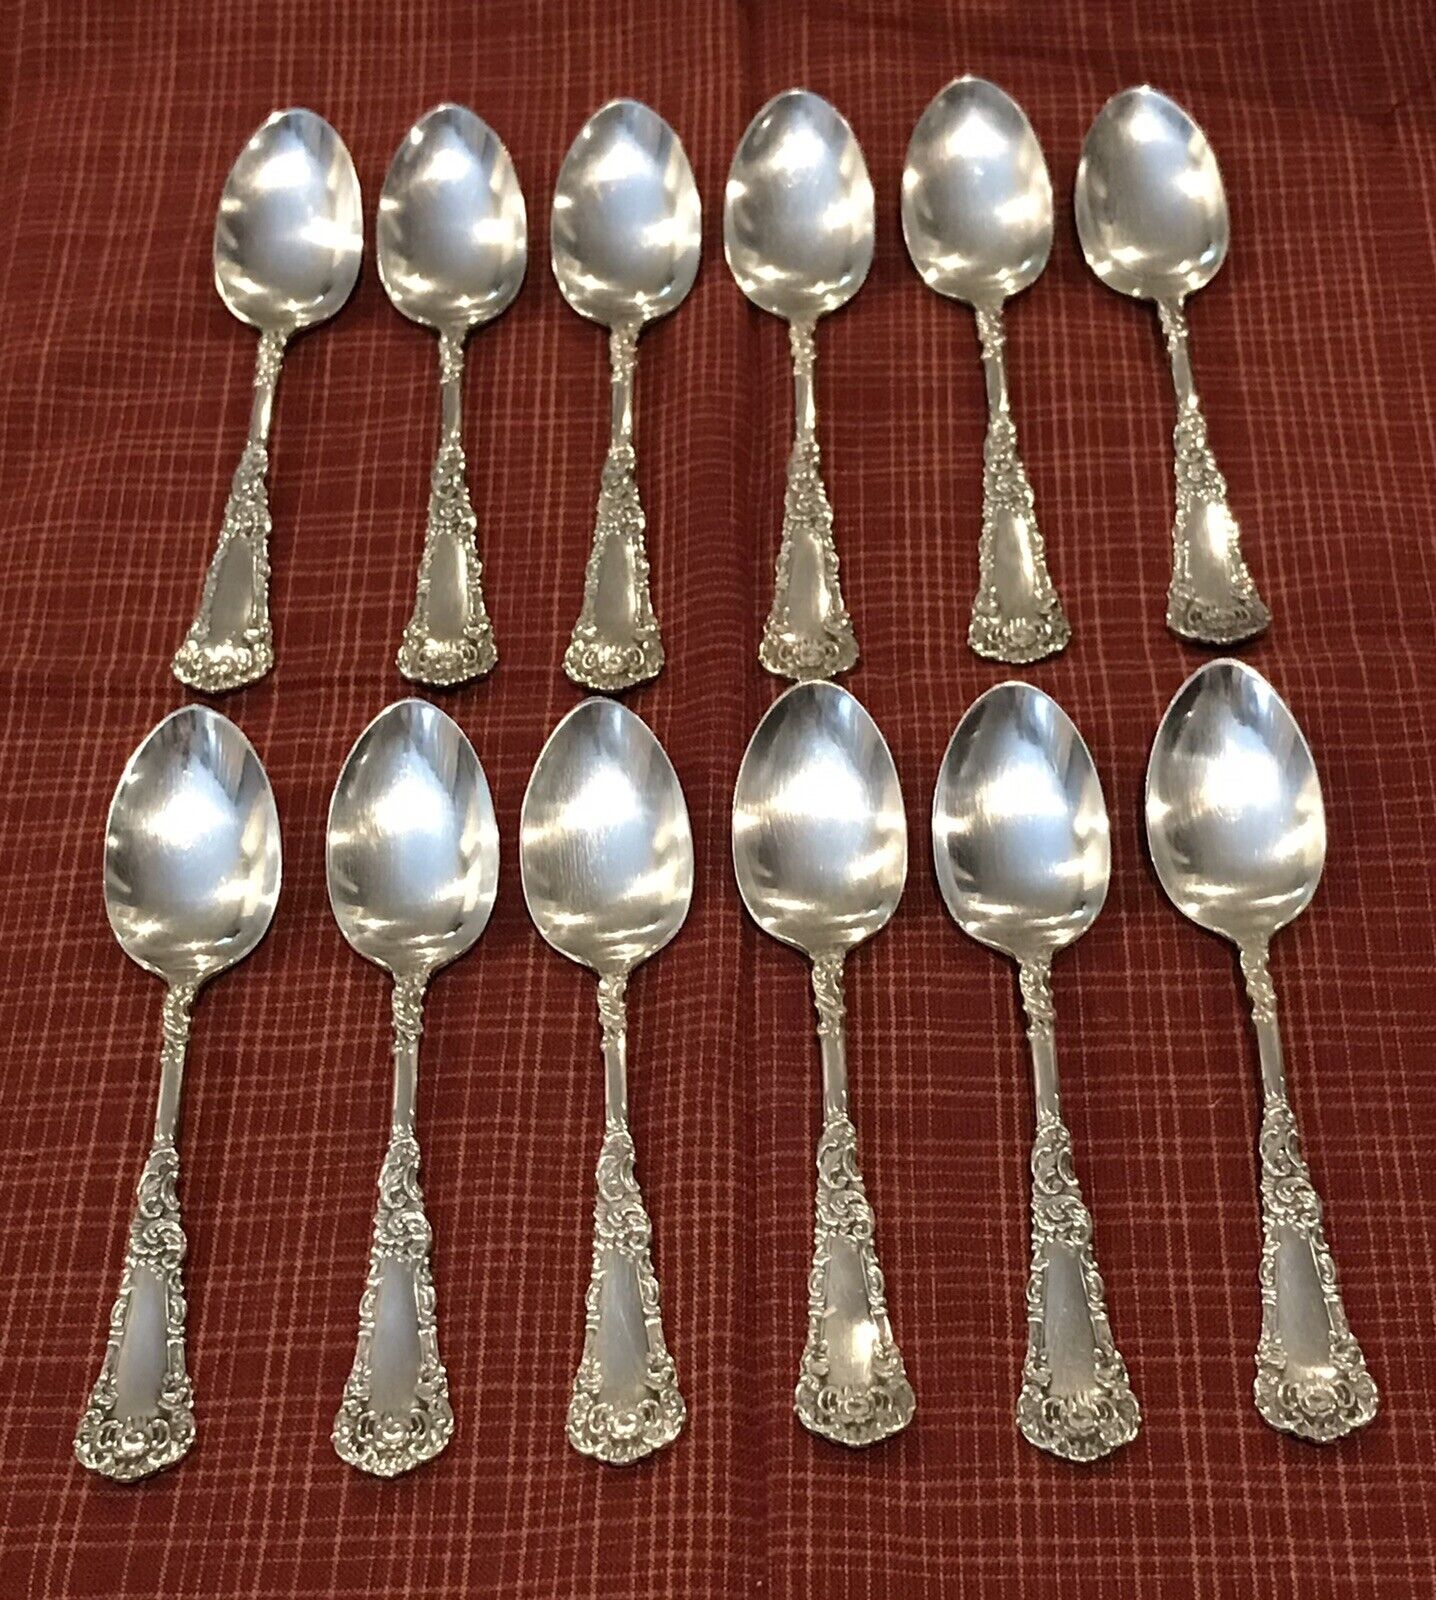 Antique c1894 YALE PATTERN SILVERPLATED Spoons